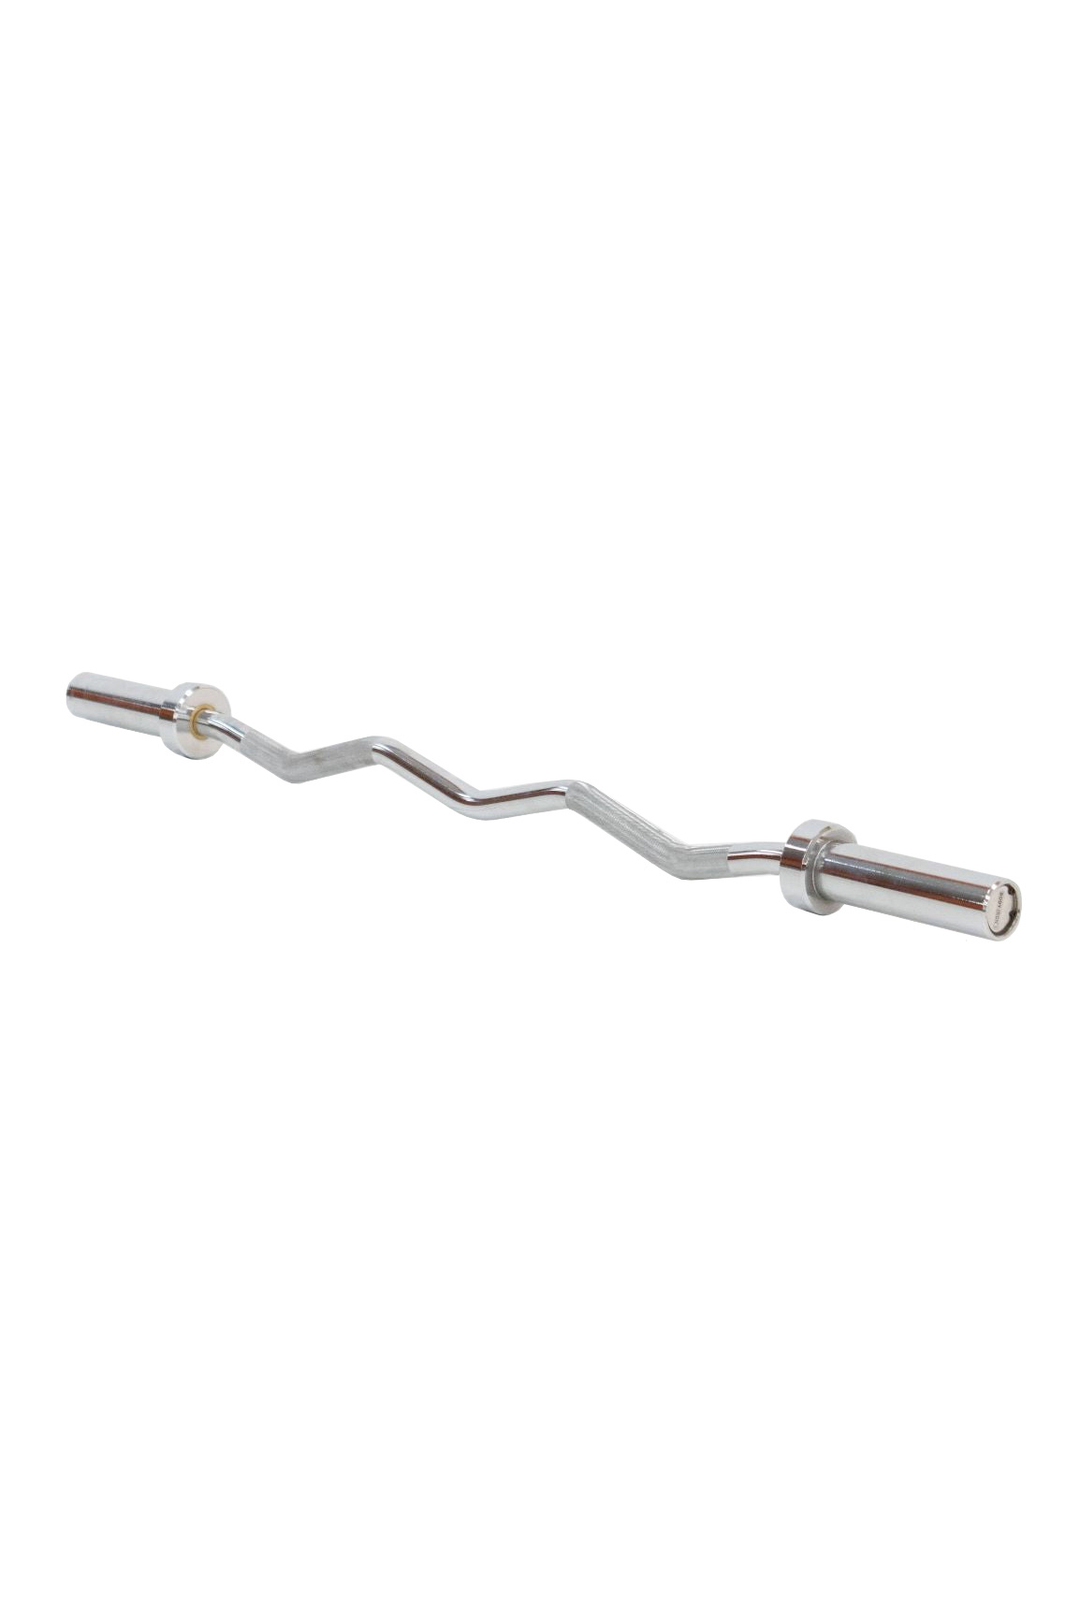 Body Iron Commercial Olympic Ez Curl Bar